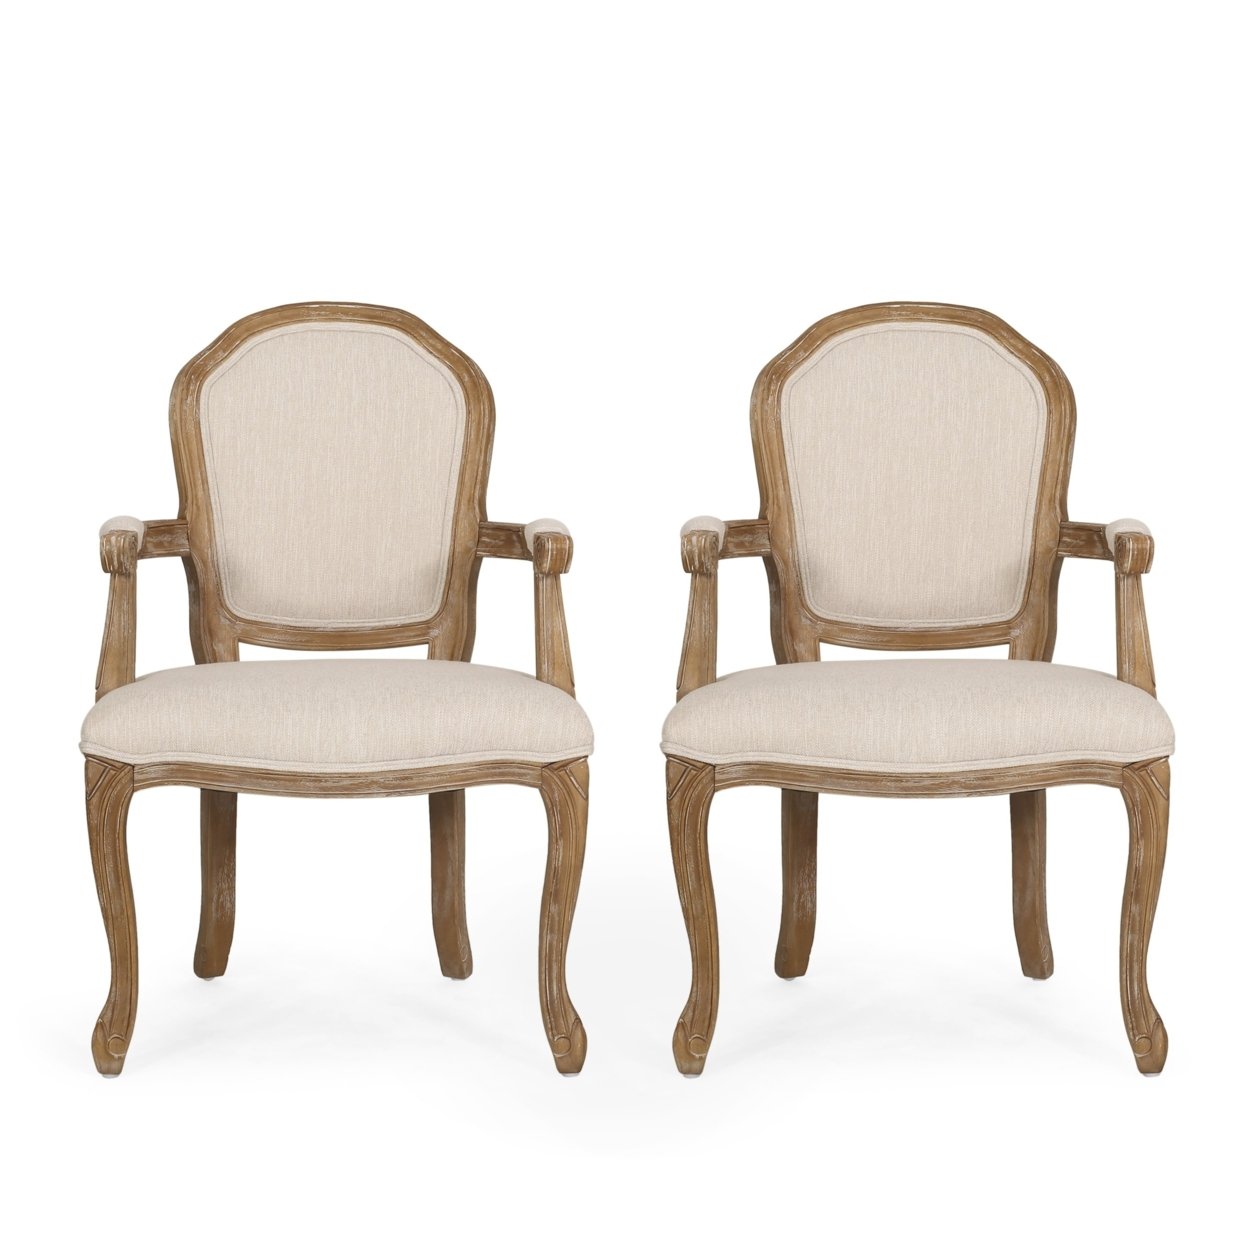 Fairgreens Traditional Upholstered Dining Chairs, Set Of 2 - Beige